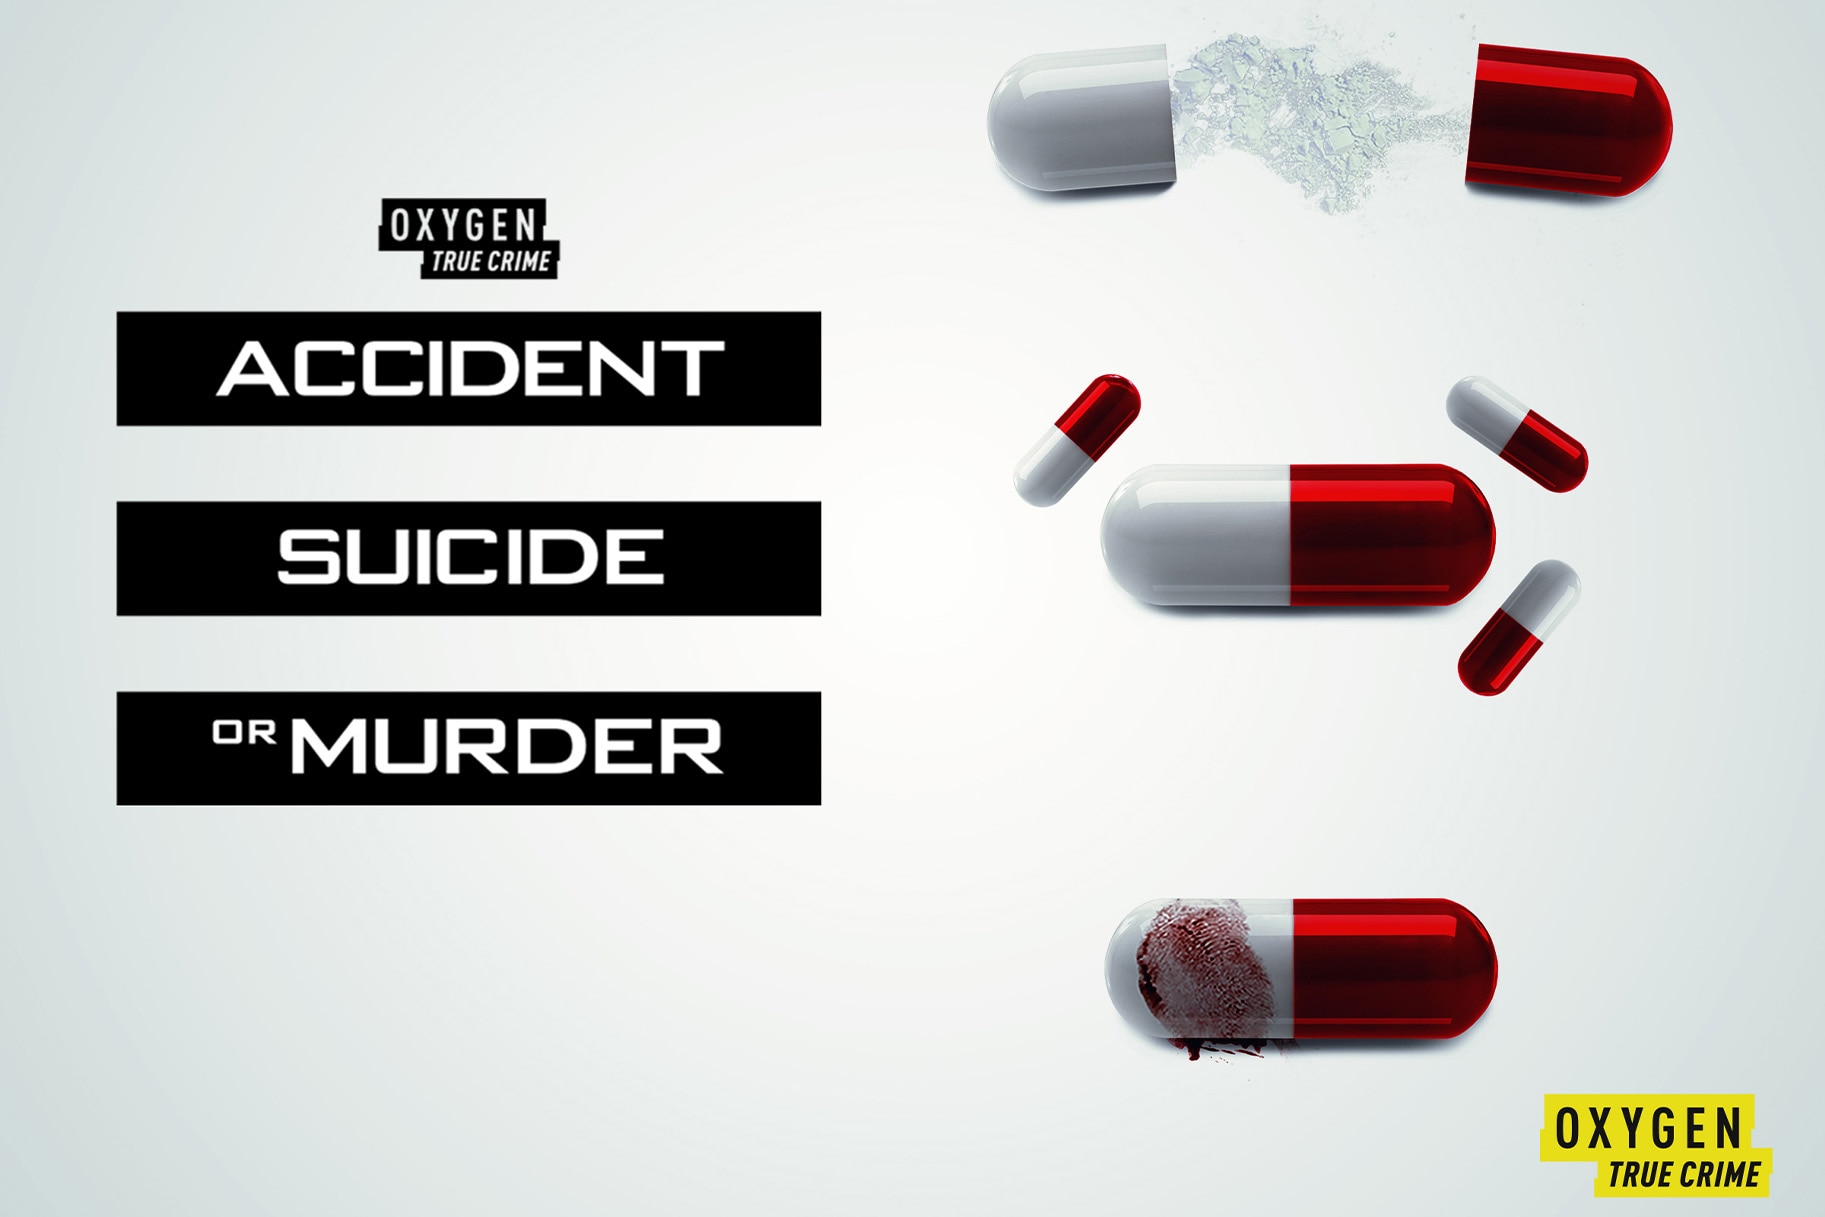 Watch the Trailer for Accident, Suicide, or Murder Season 5 [Video]